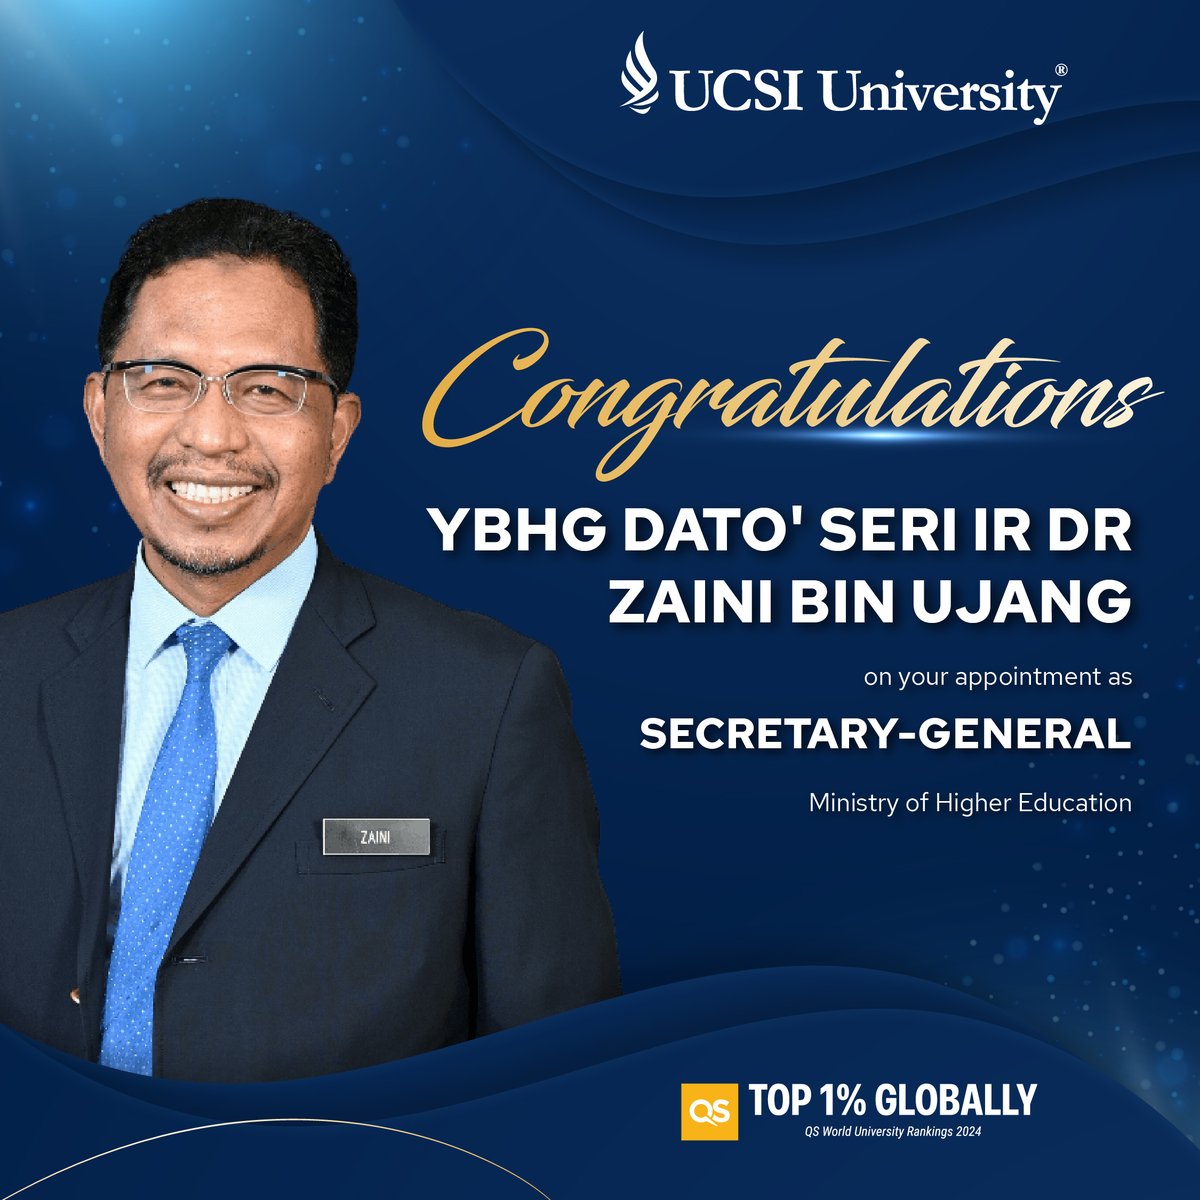 Congratulations, Ybhg Dato' Seri Ir Dr Zaini Bin Ujang on your appointment as the Secretary-General of the Ministry of Higher Education! #ucsi #ucsiuniversity #mohe #highereducation #malaysiamadani #secretarygeneral #education #malaysia #kpt